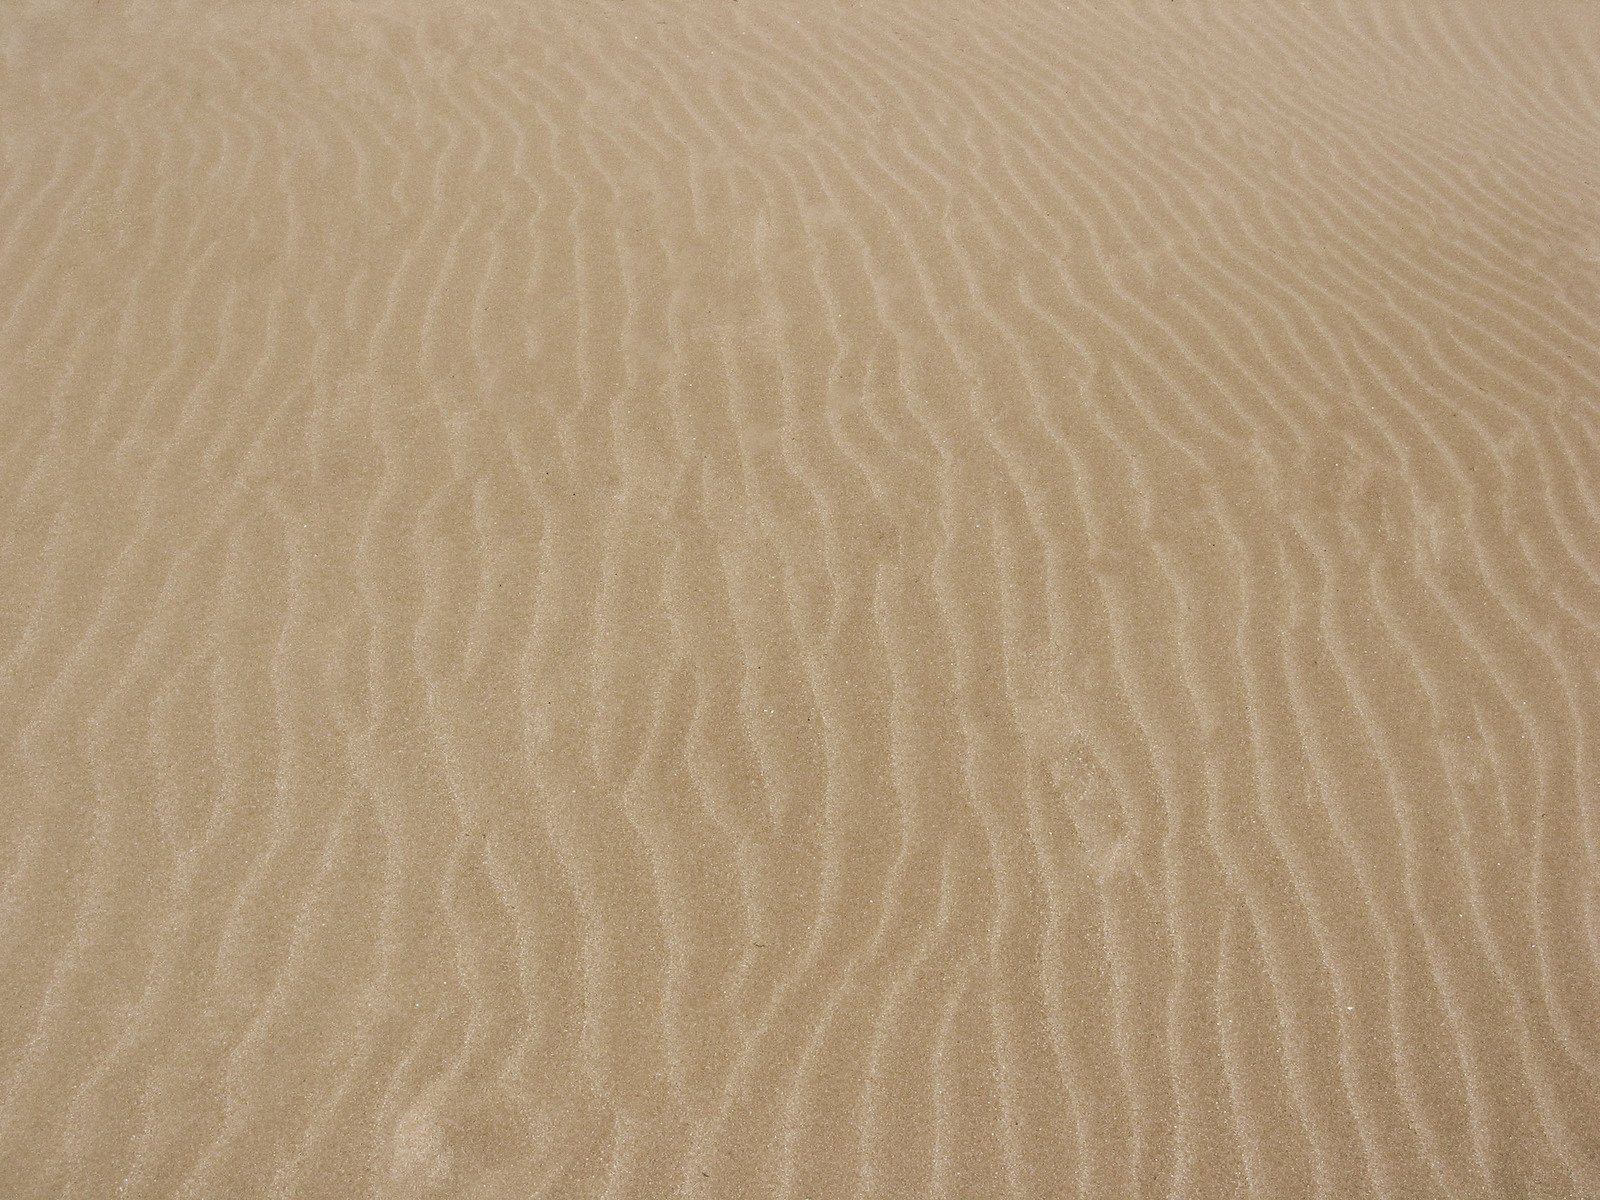 the sand looks very wavy with lines in it